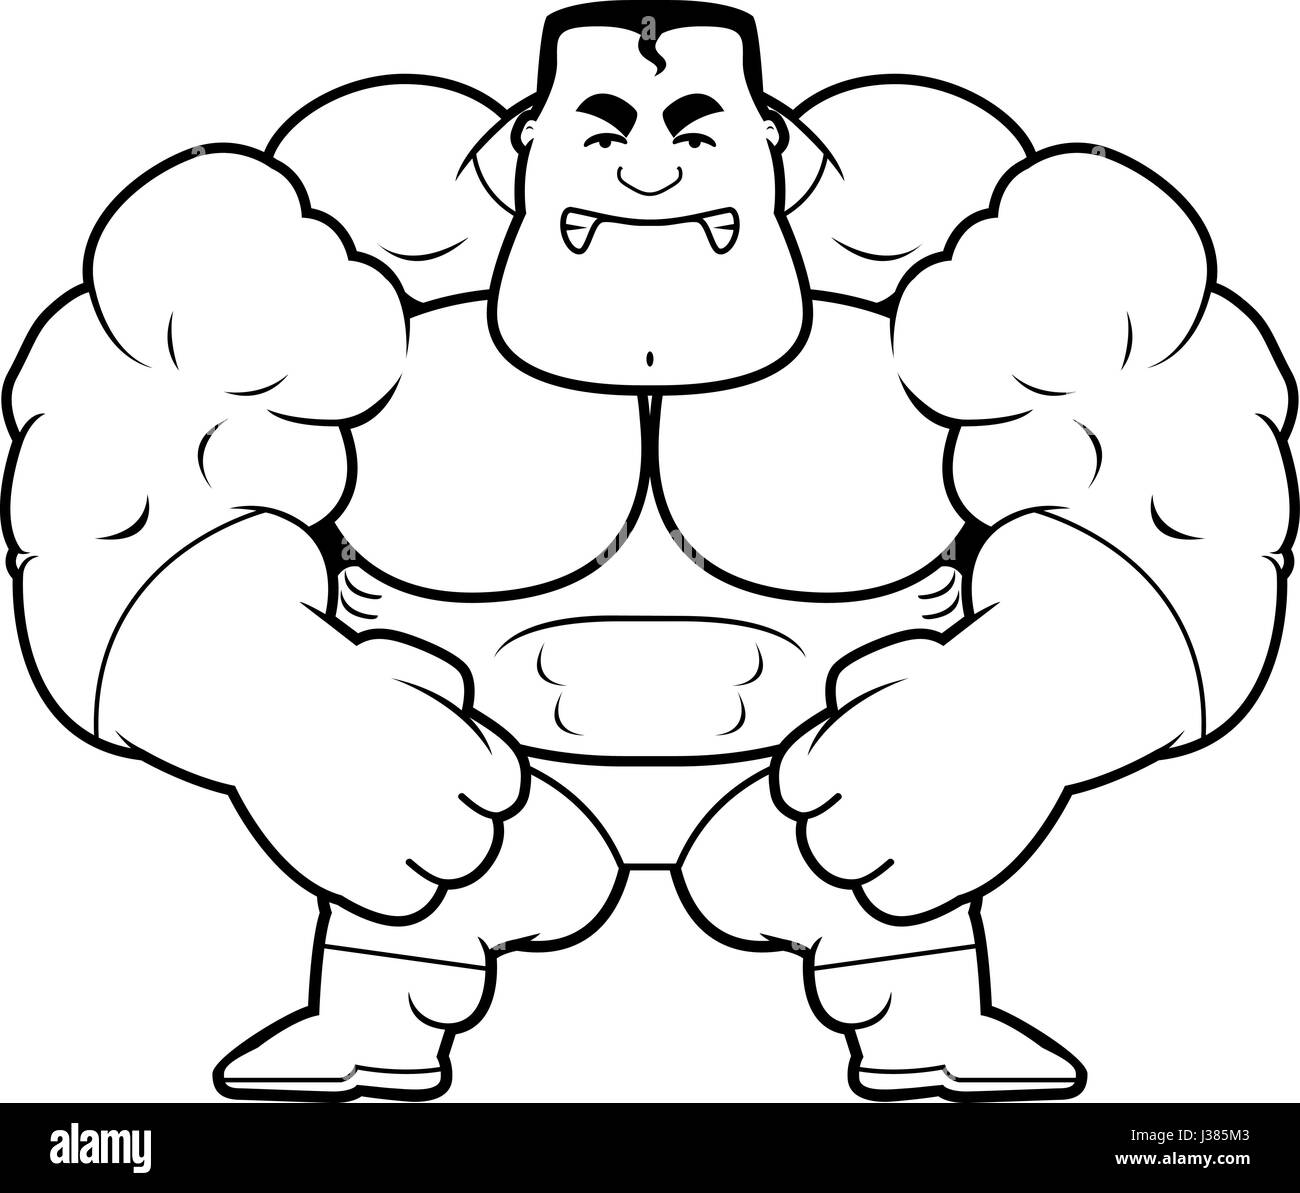 A cartoon illustration of a muscular superhero looking angry. Stock Vector